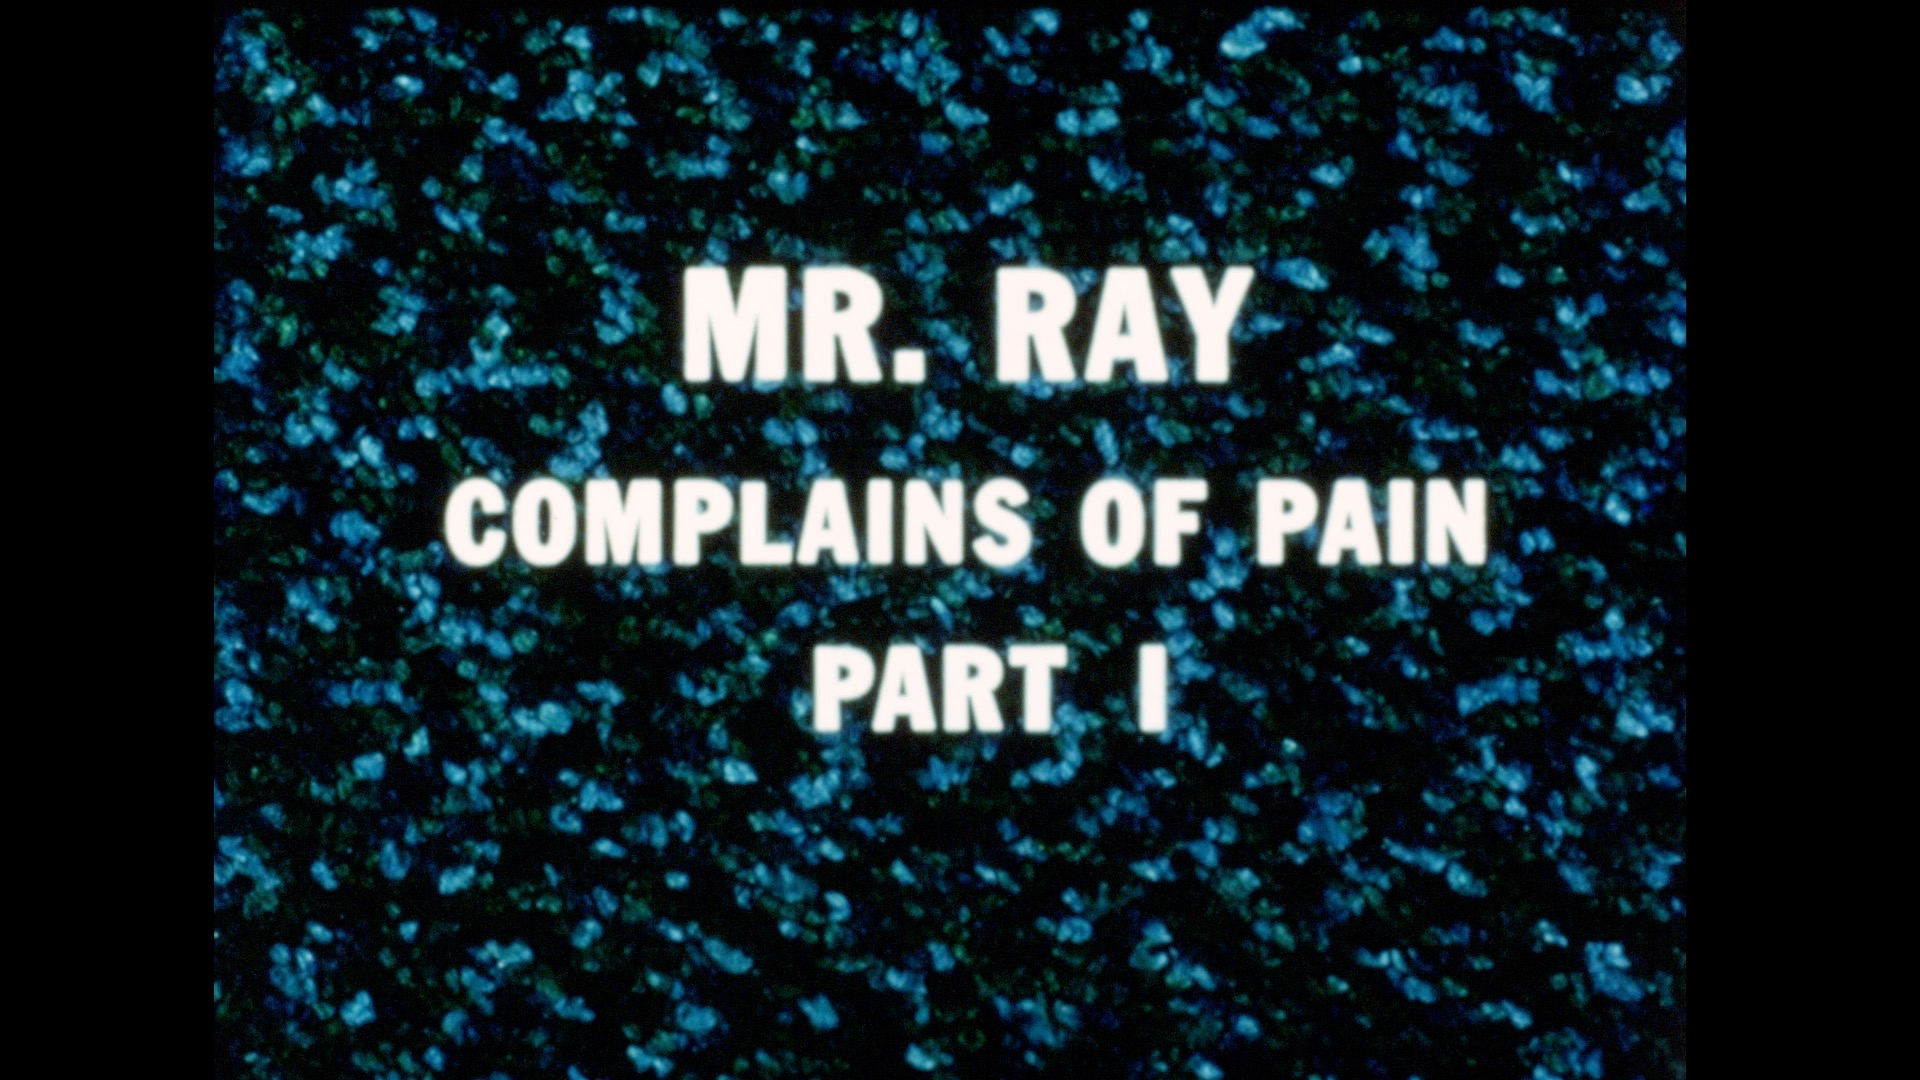 Mr. Ray Complains of Pain (part 1), 1968